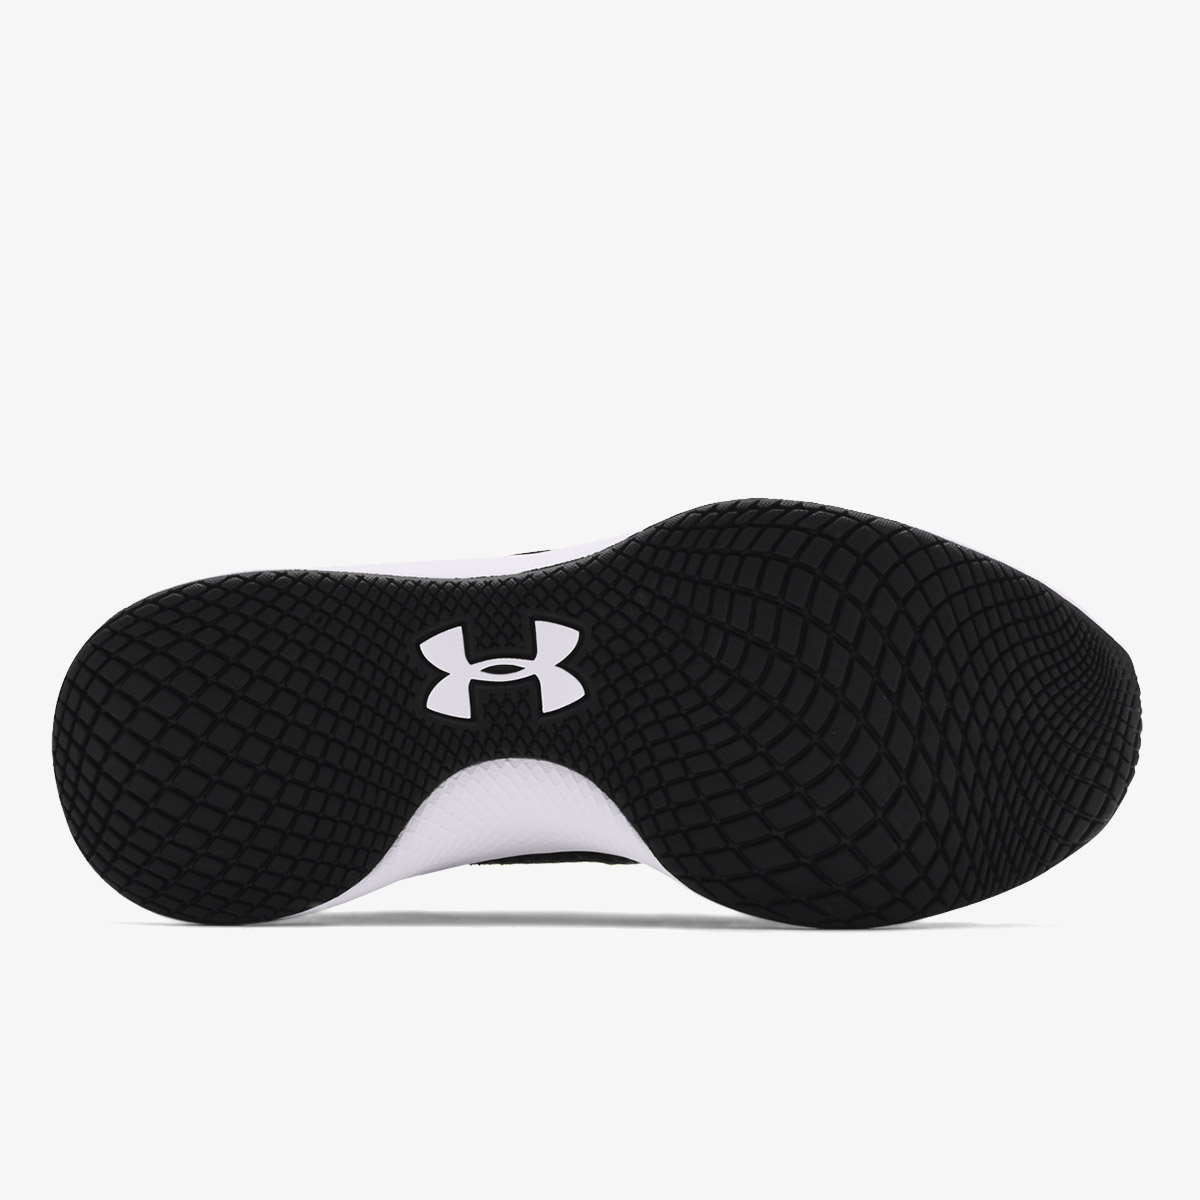 Under Armour UA Charged Breathe 3 Training Shoes 